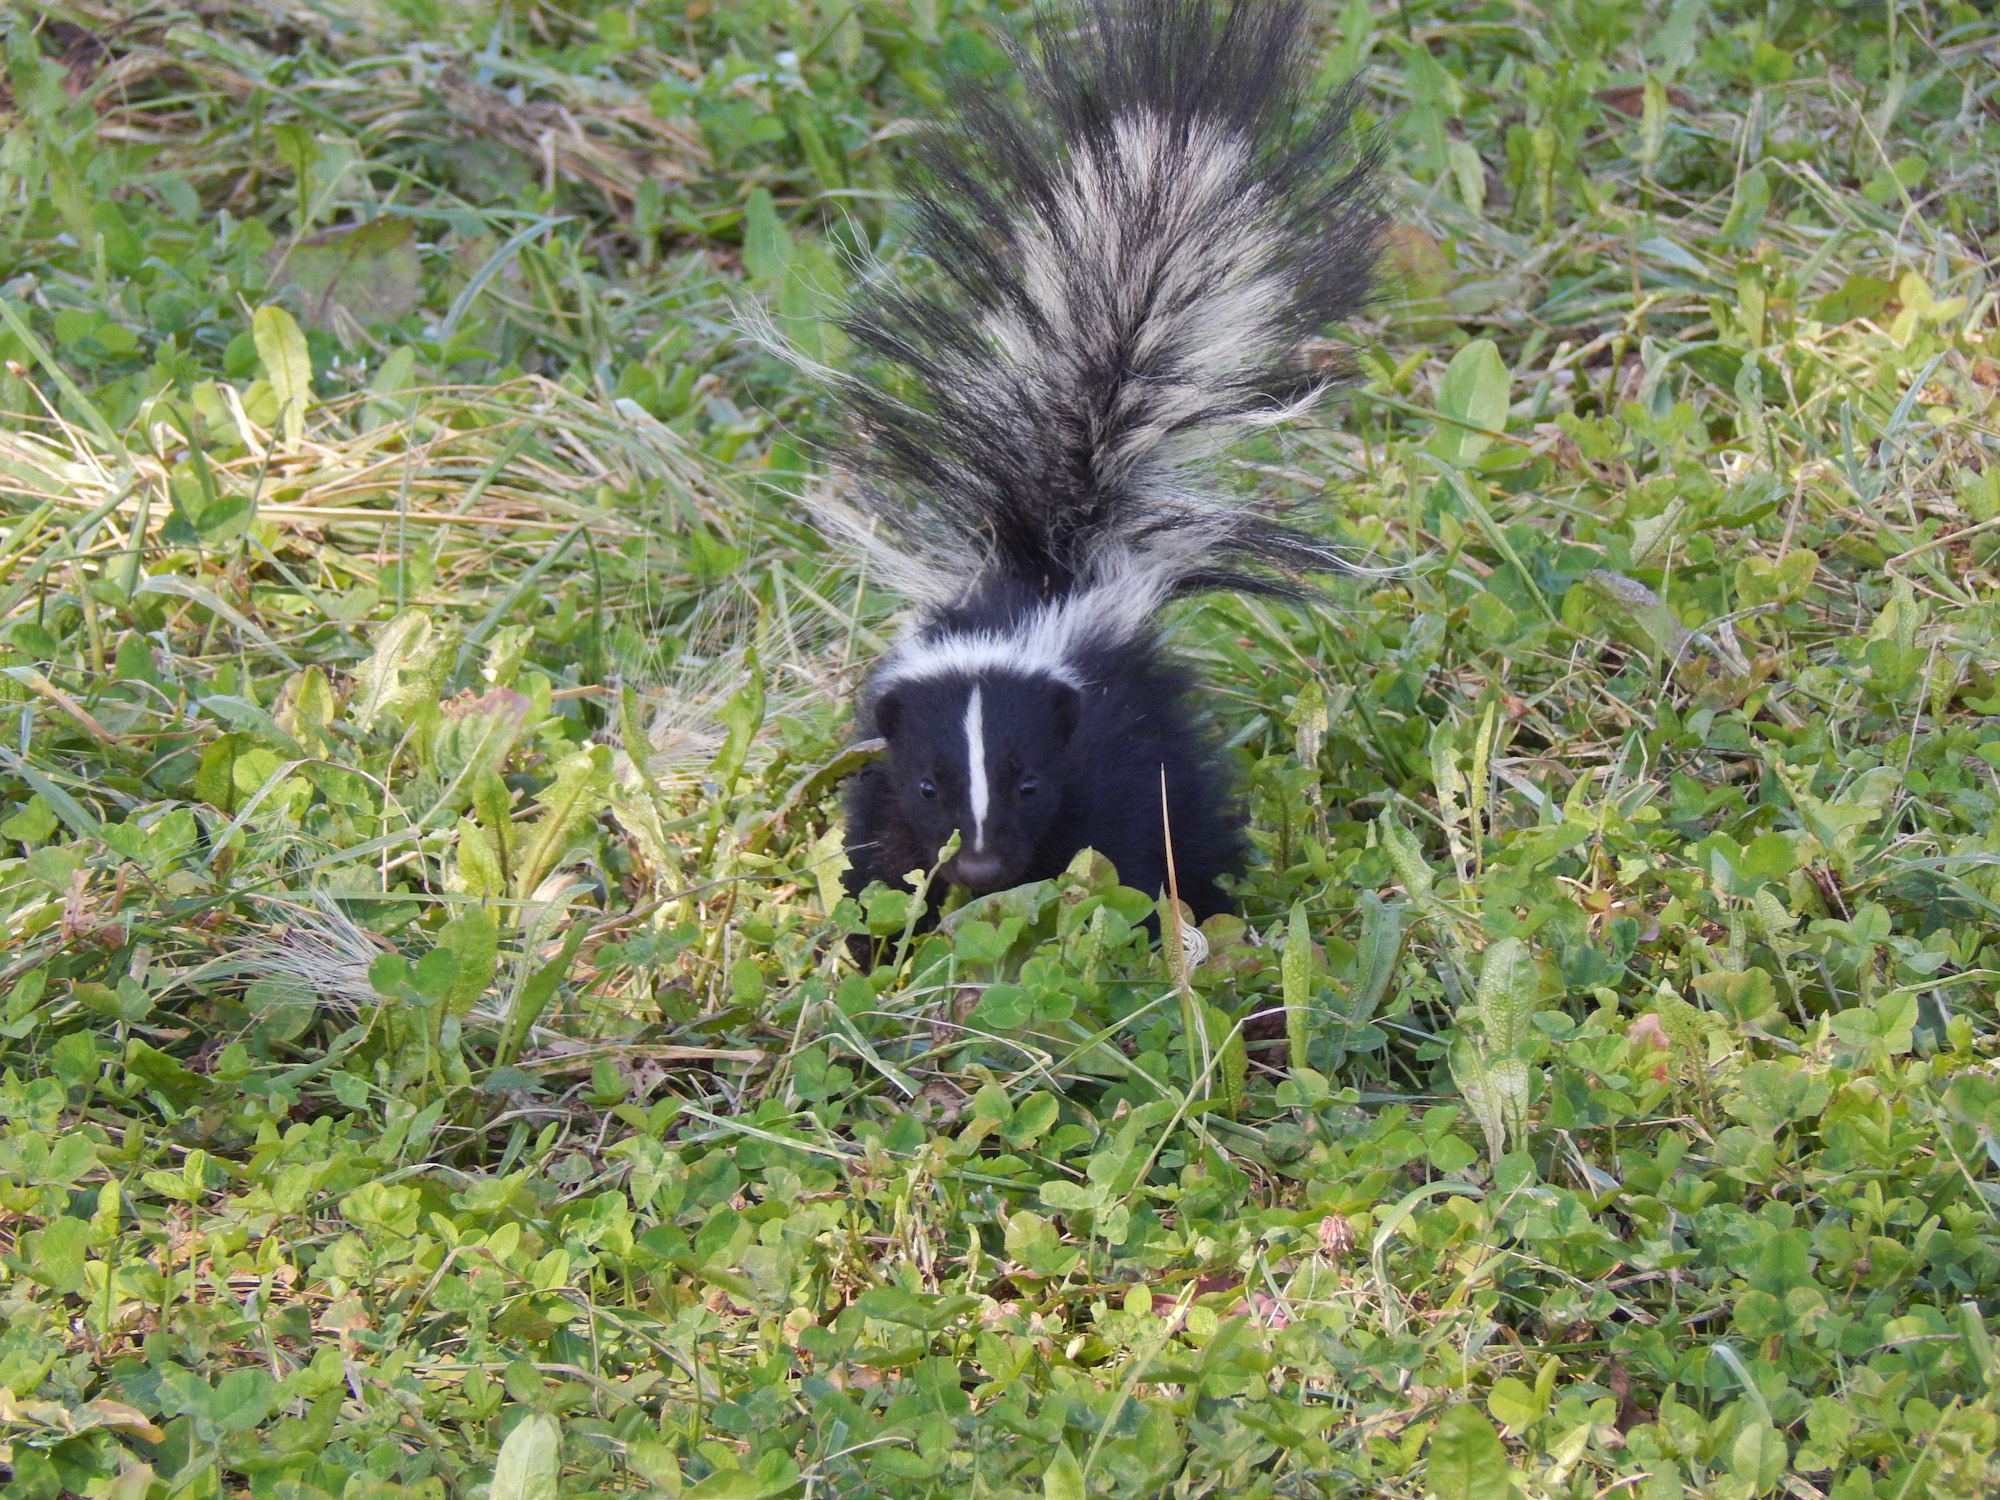 Skunk in the grass